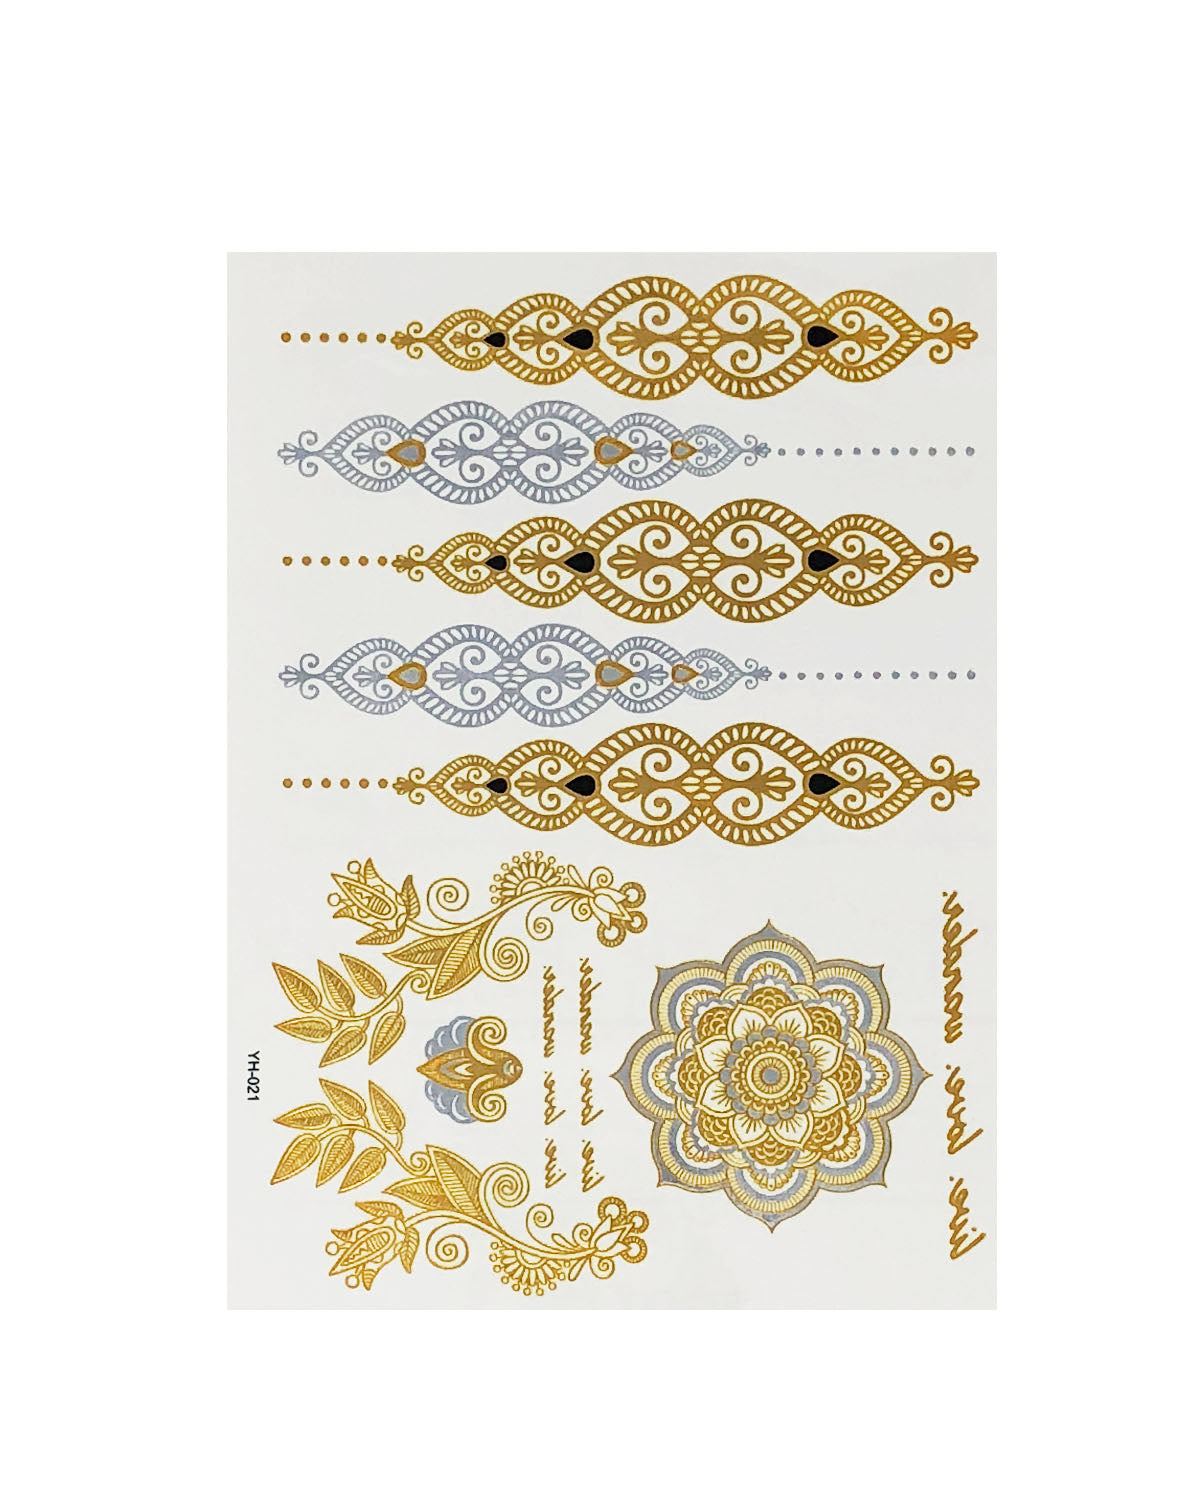 Wrapables® Celebrity Inspired Temporary Tattoos in Metallic Gold Silver and Black (6 Sheets), Large